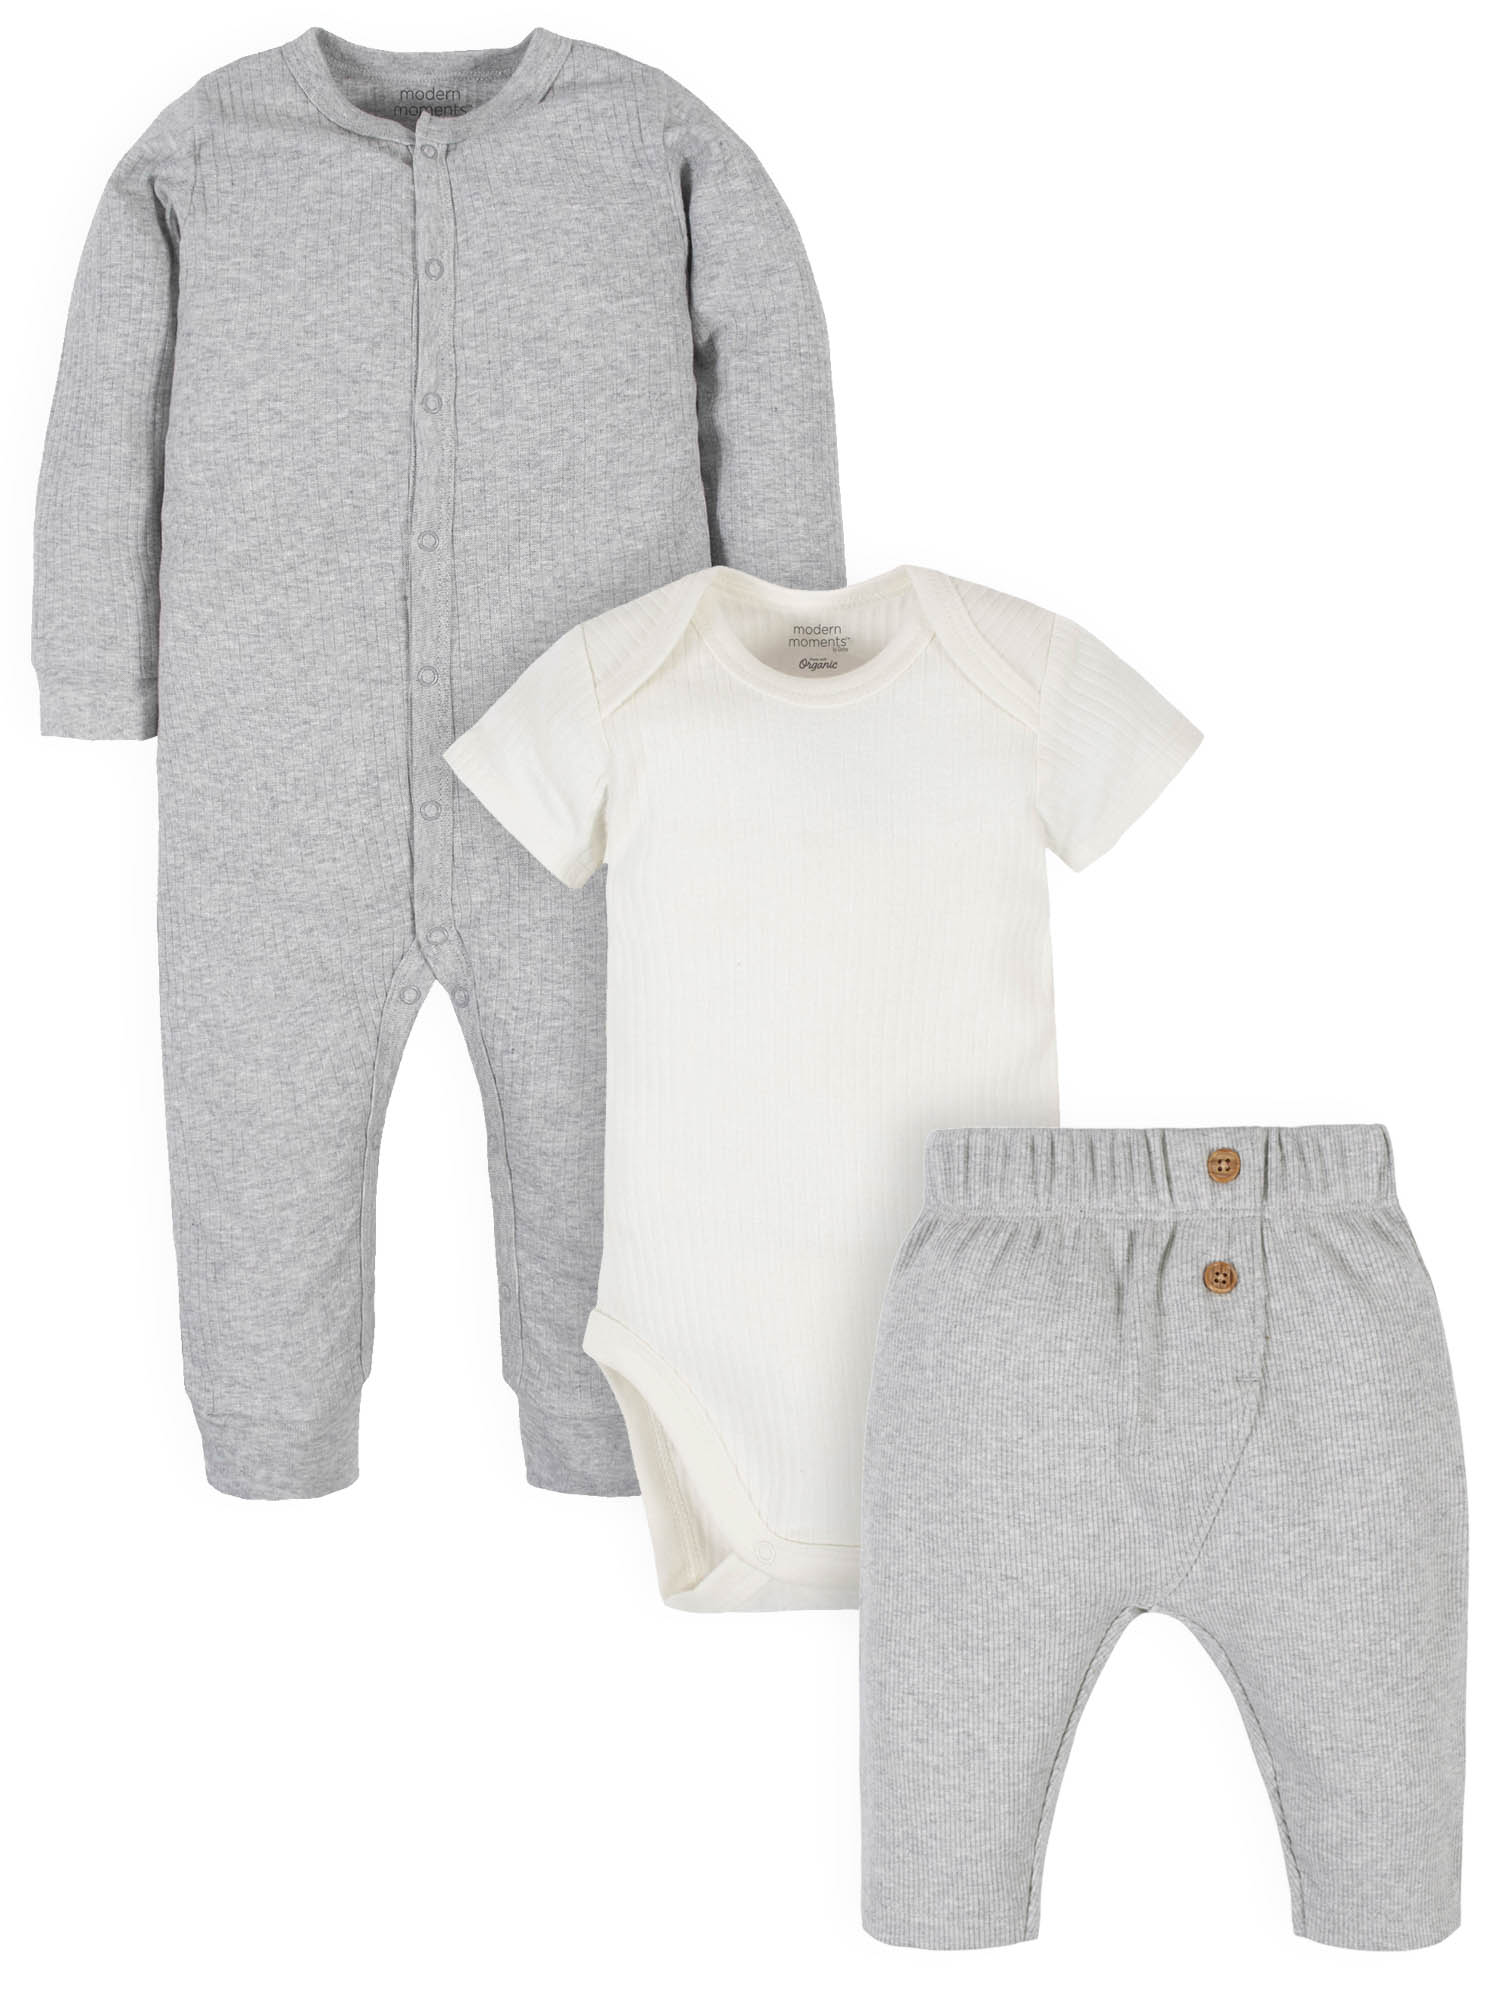 Modern Moments by Gerber Baby Boy Bodysuit, Coveralls, and Pants Outfit Set, 3-Piece (Newborn-12M) - image 1 of 9